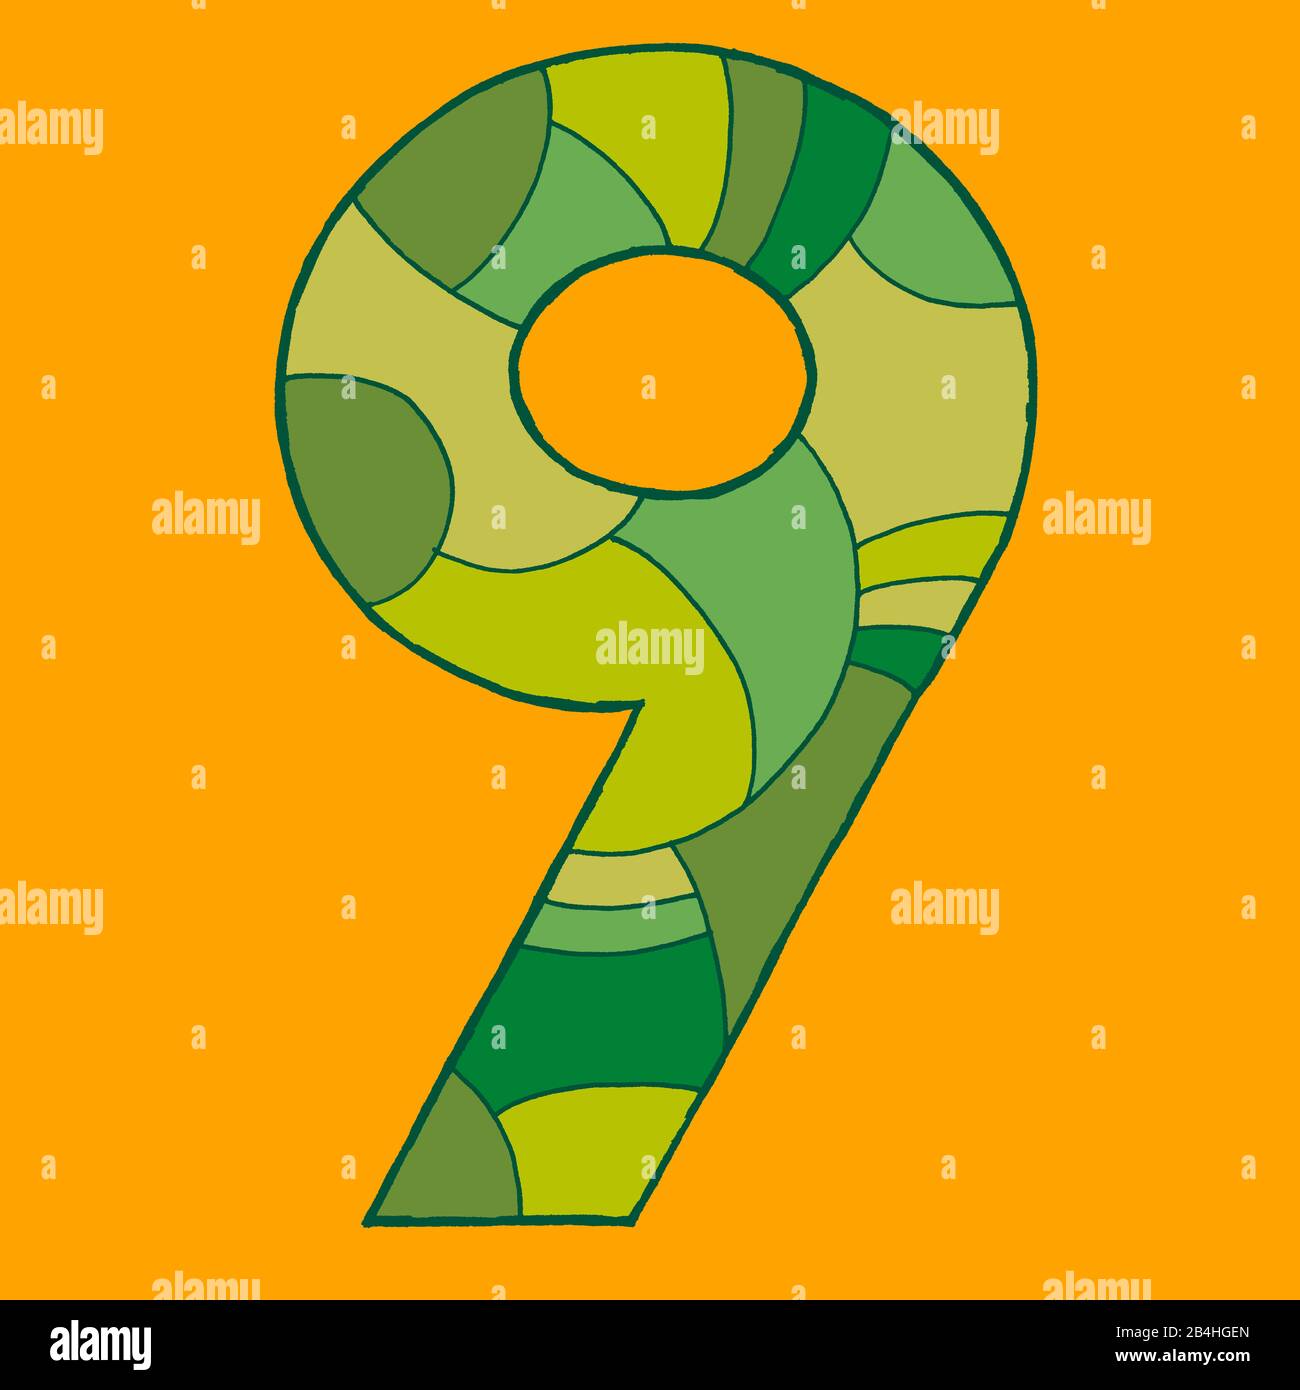 Numeral 9, drawn as a vector illustration, in greenish hues on a yellow background in pop art style Stock Photo